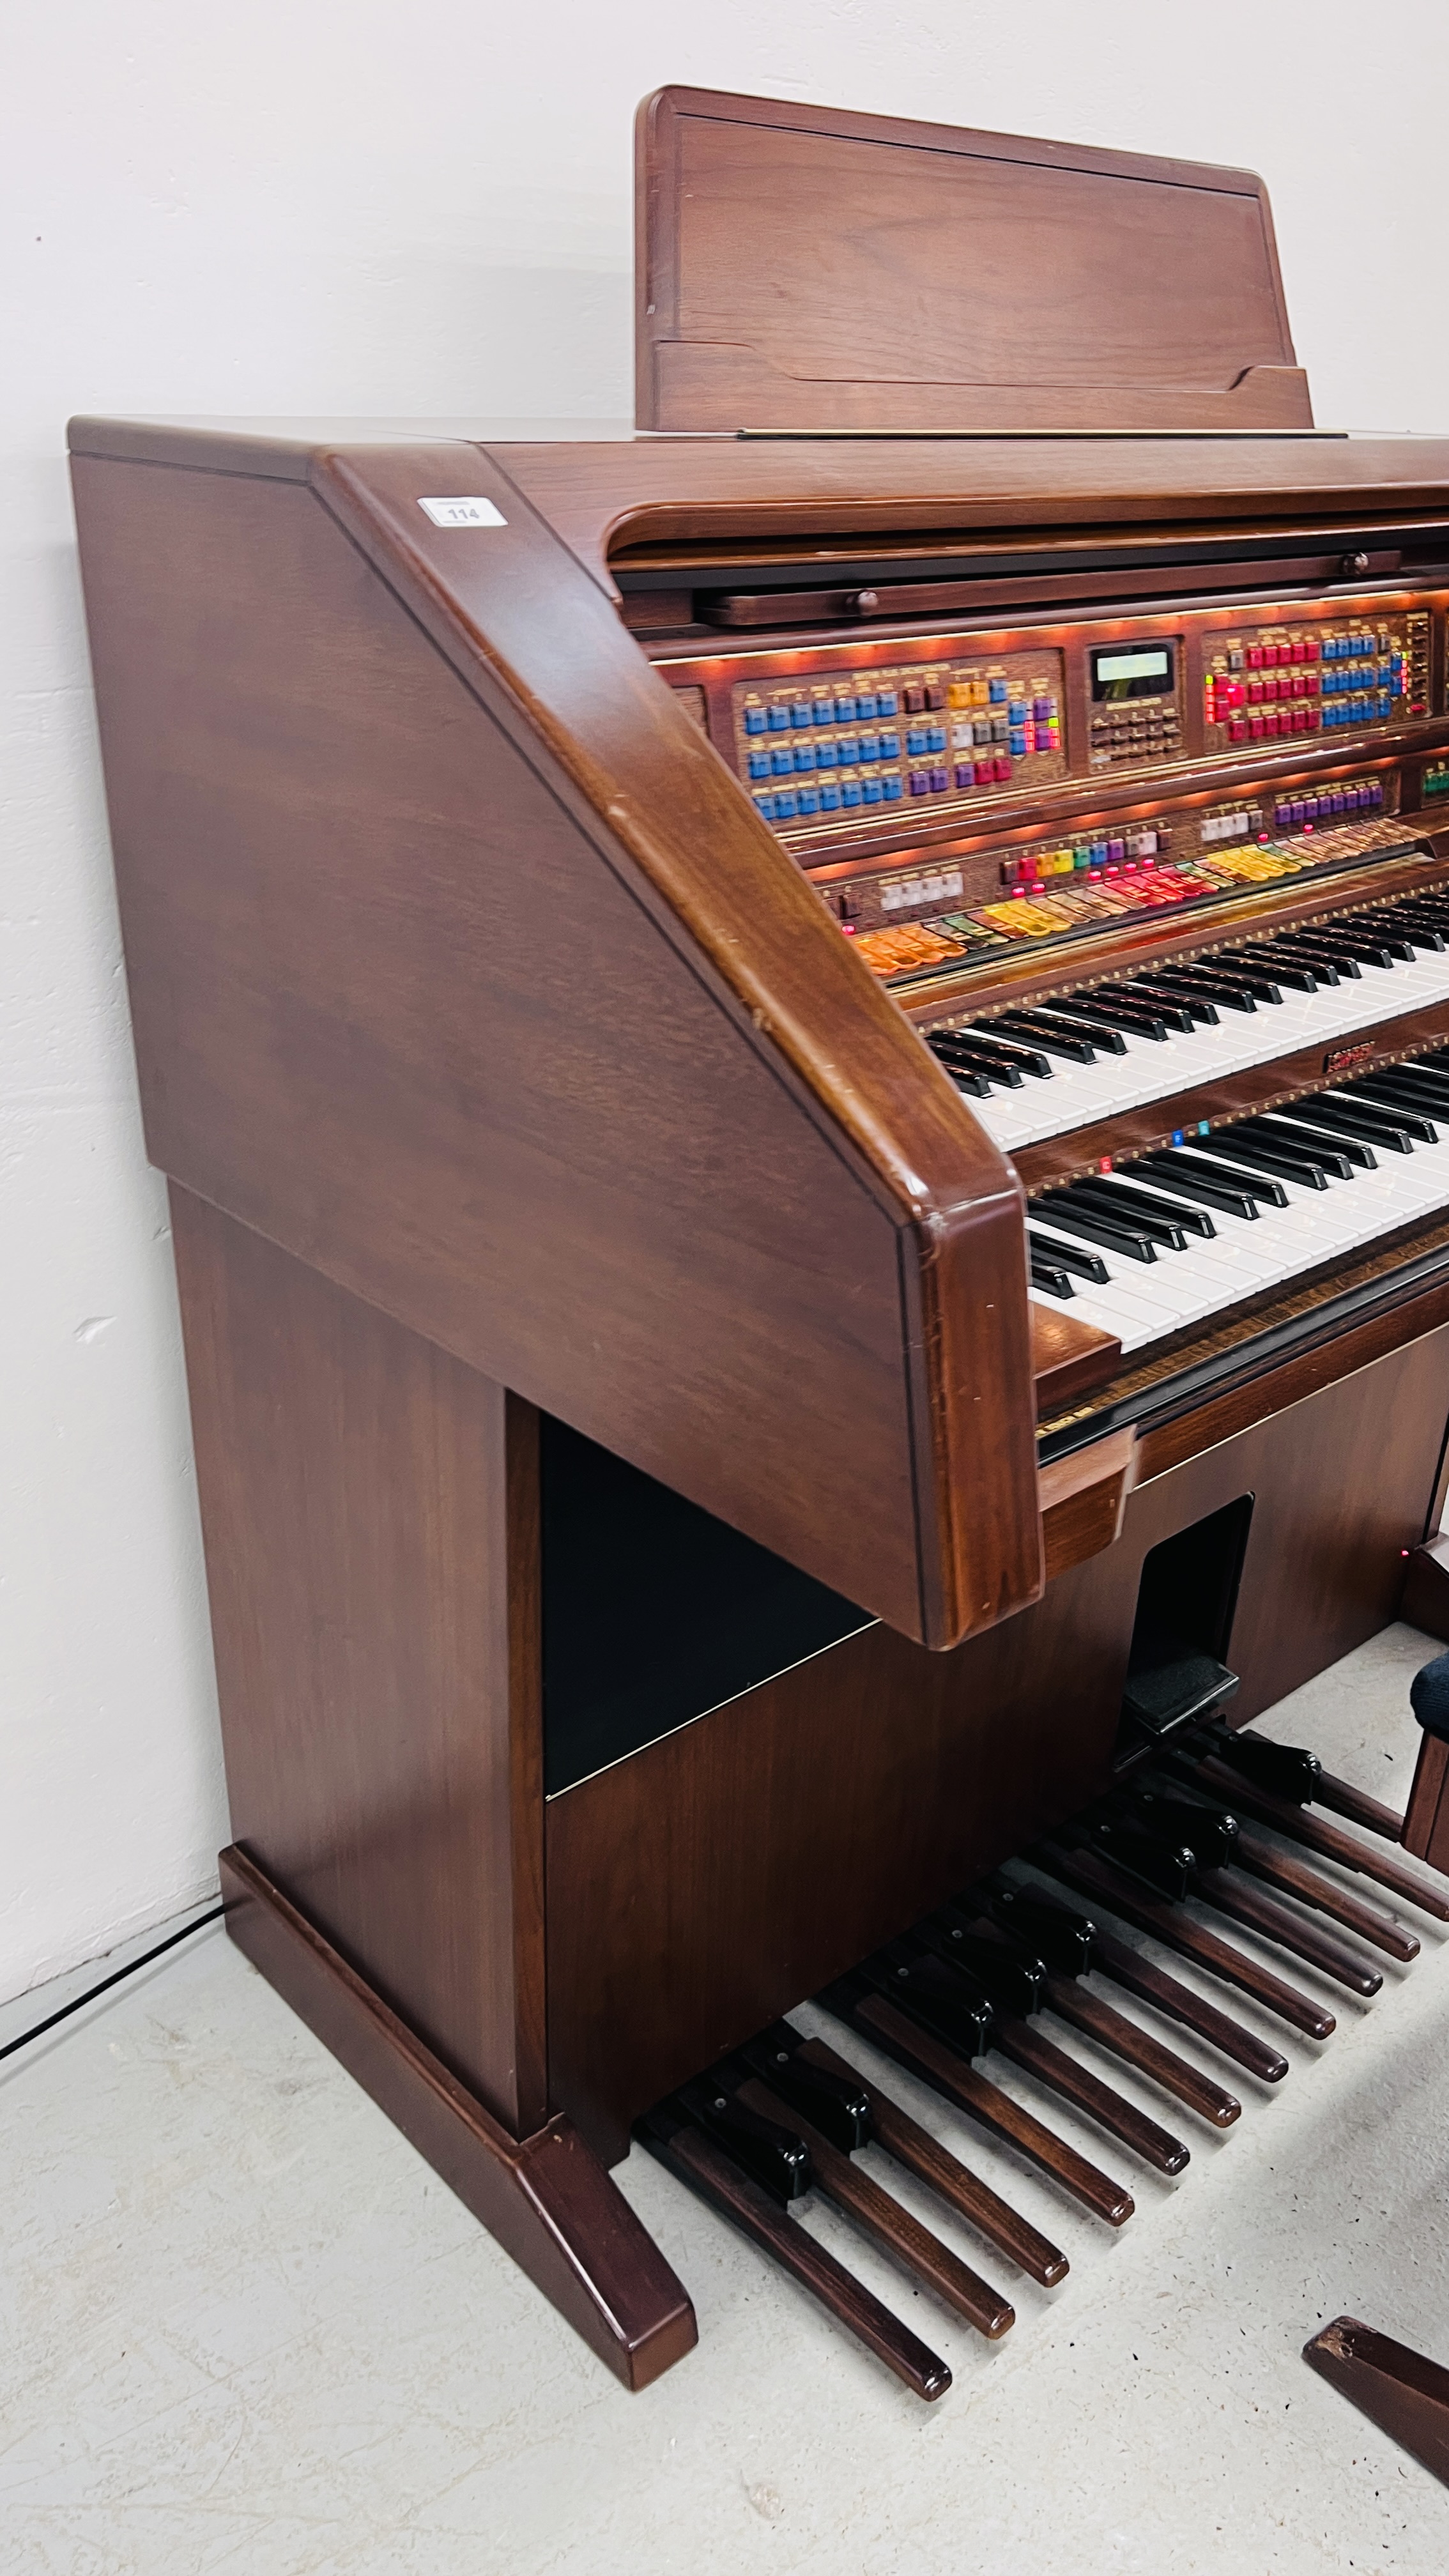 A LOWREY PROMENADE LX400 ELECTRIC ORGAN COMPLETE WITH LOWREY STOOL, - Image 8 of 14